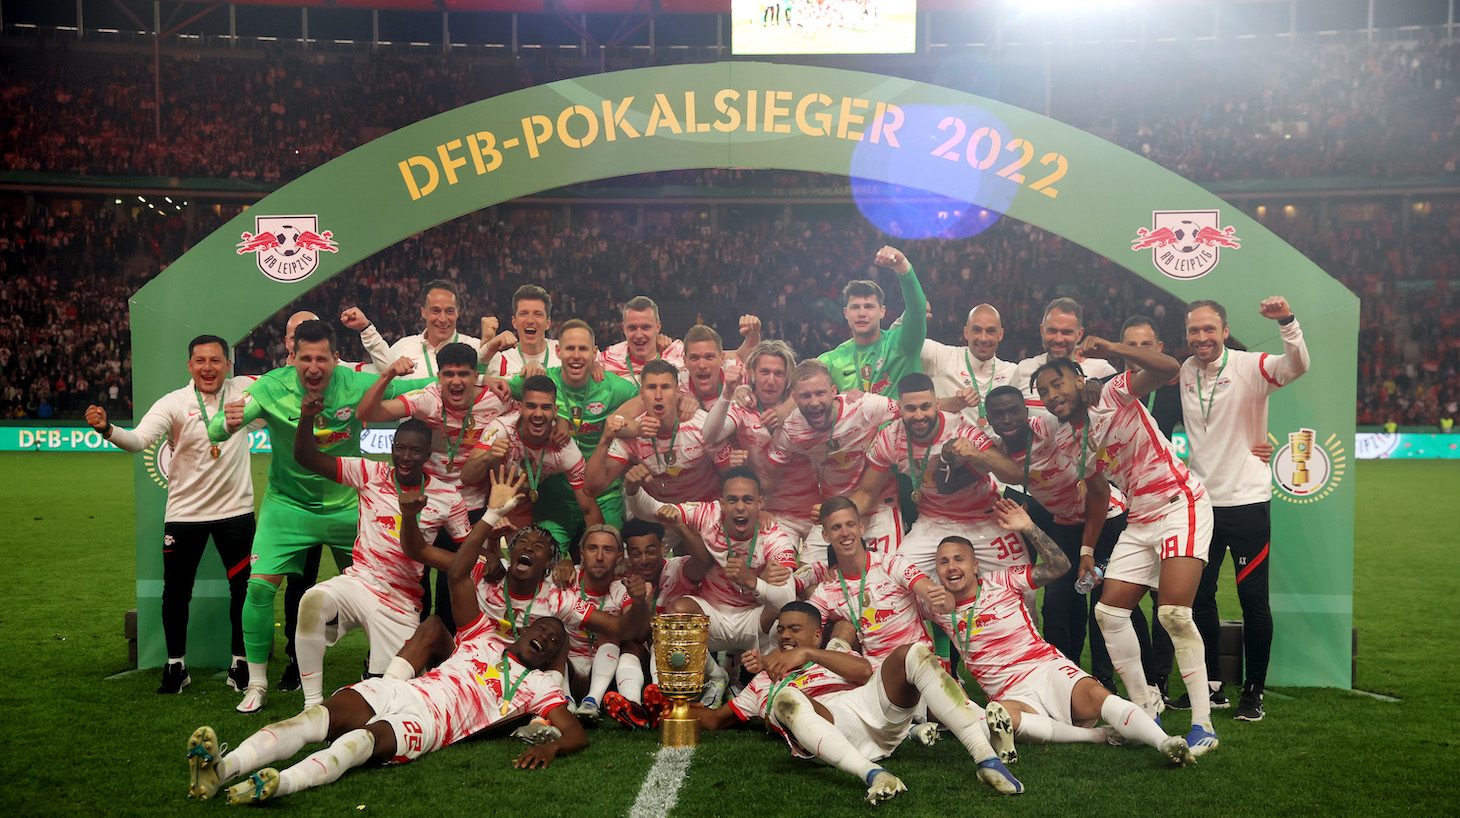 RB Leipzig players celebrate with the DFB-Pokal trophy after their sides victory during the final match of the DFB Cup 2022 between SC Freiburg and RB Leipzig at Olympiastadion on May 21, 2022 in Berlin, Germany.